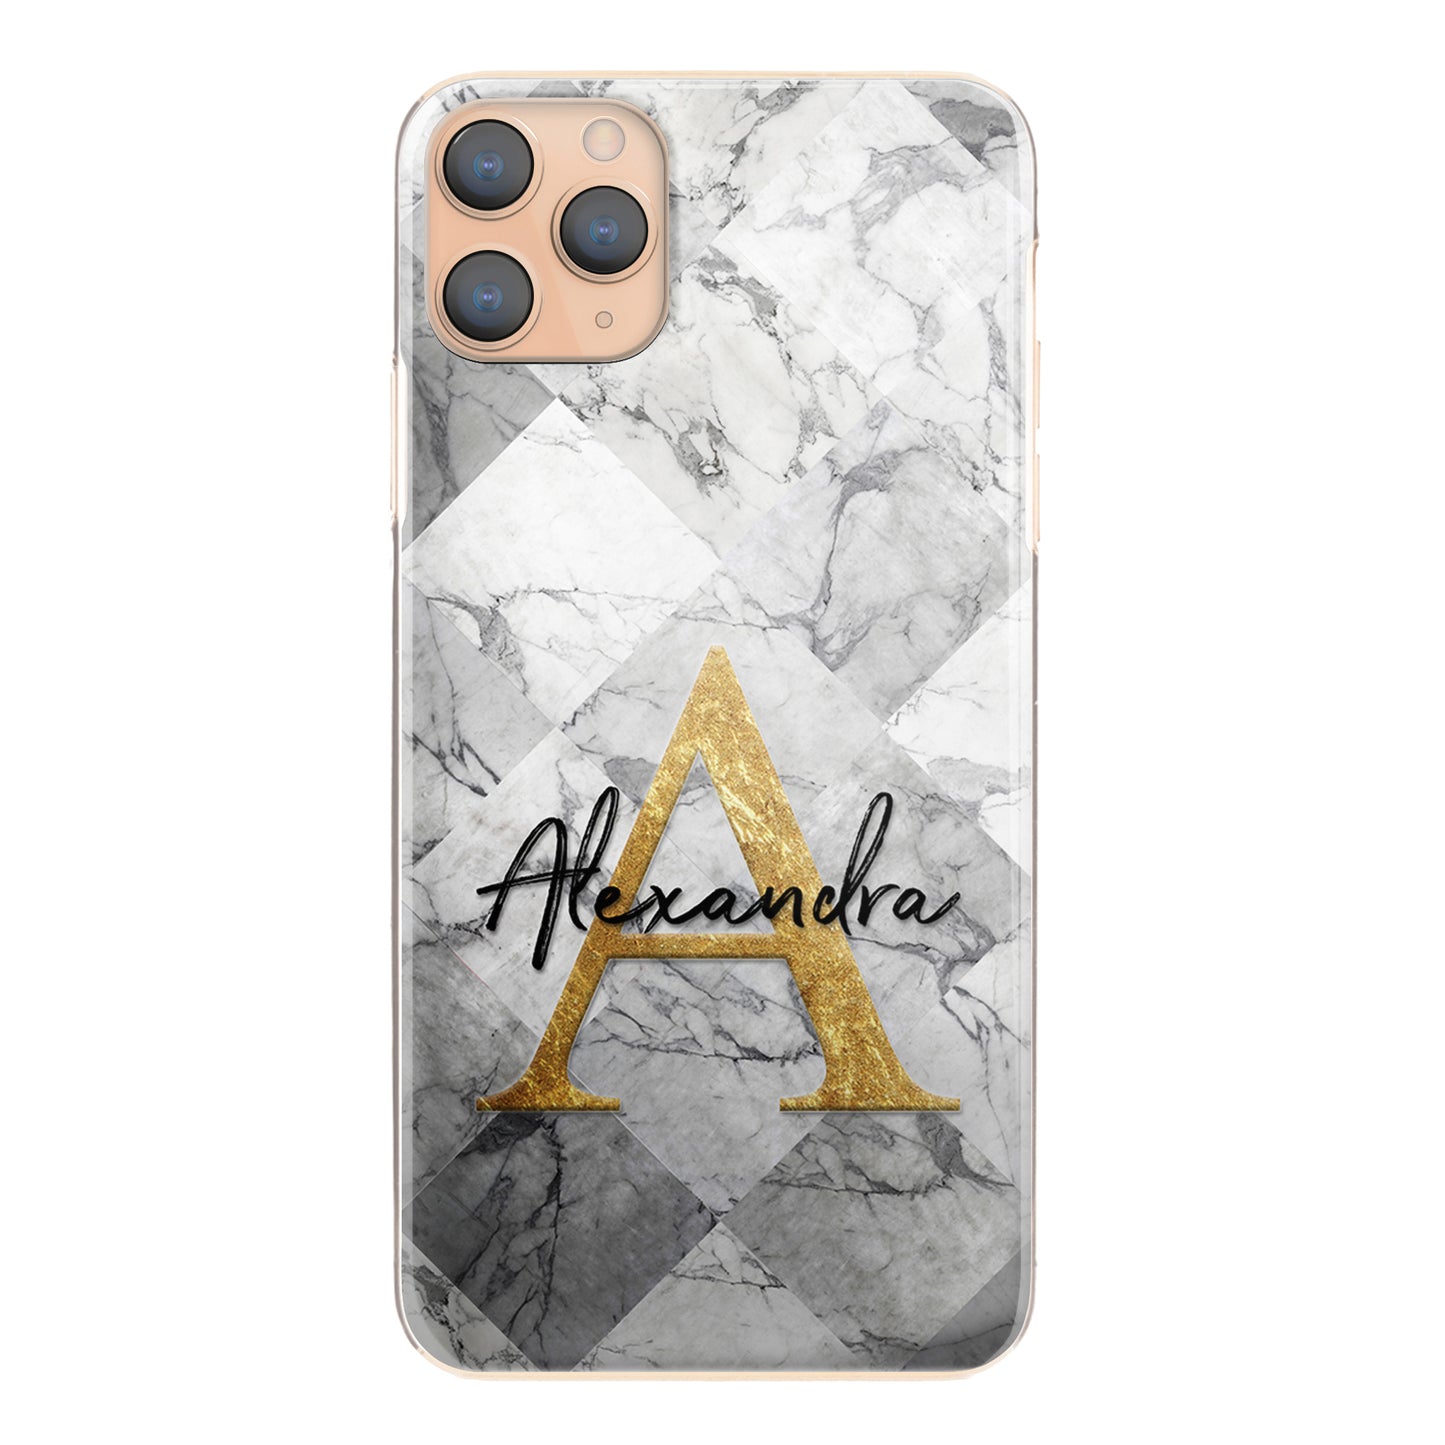 Personalised Sony Phone Hard Case with Gold Monogram and Stylish Text on Patterned Grey Marble